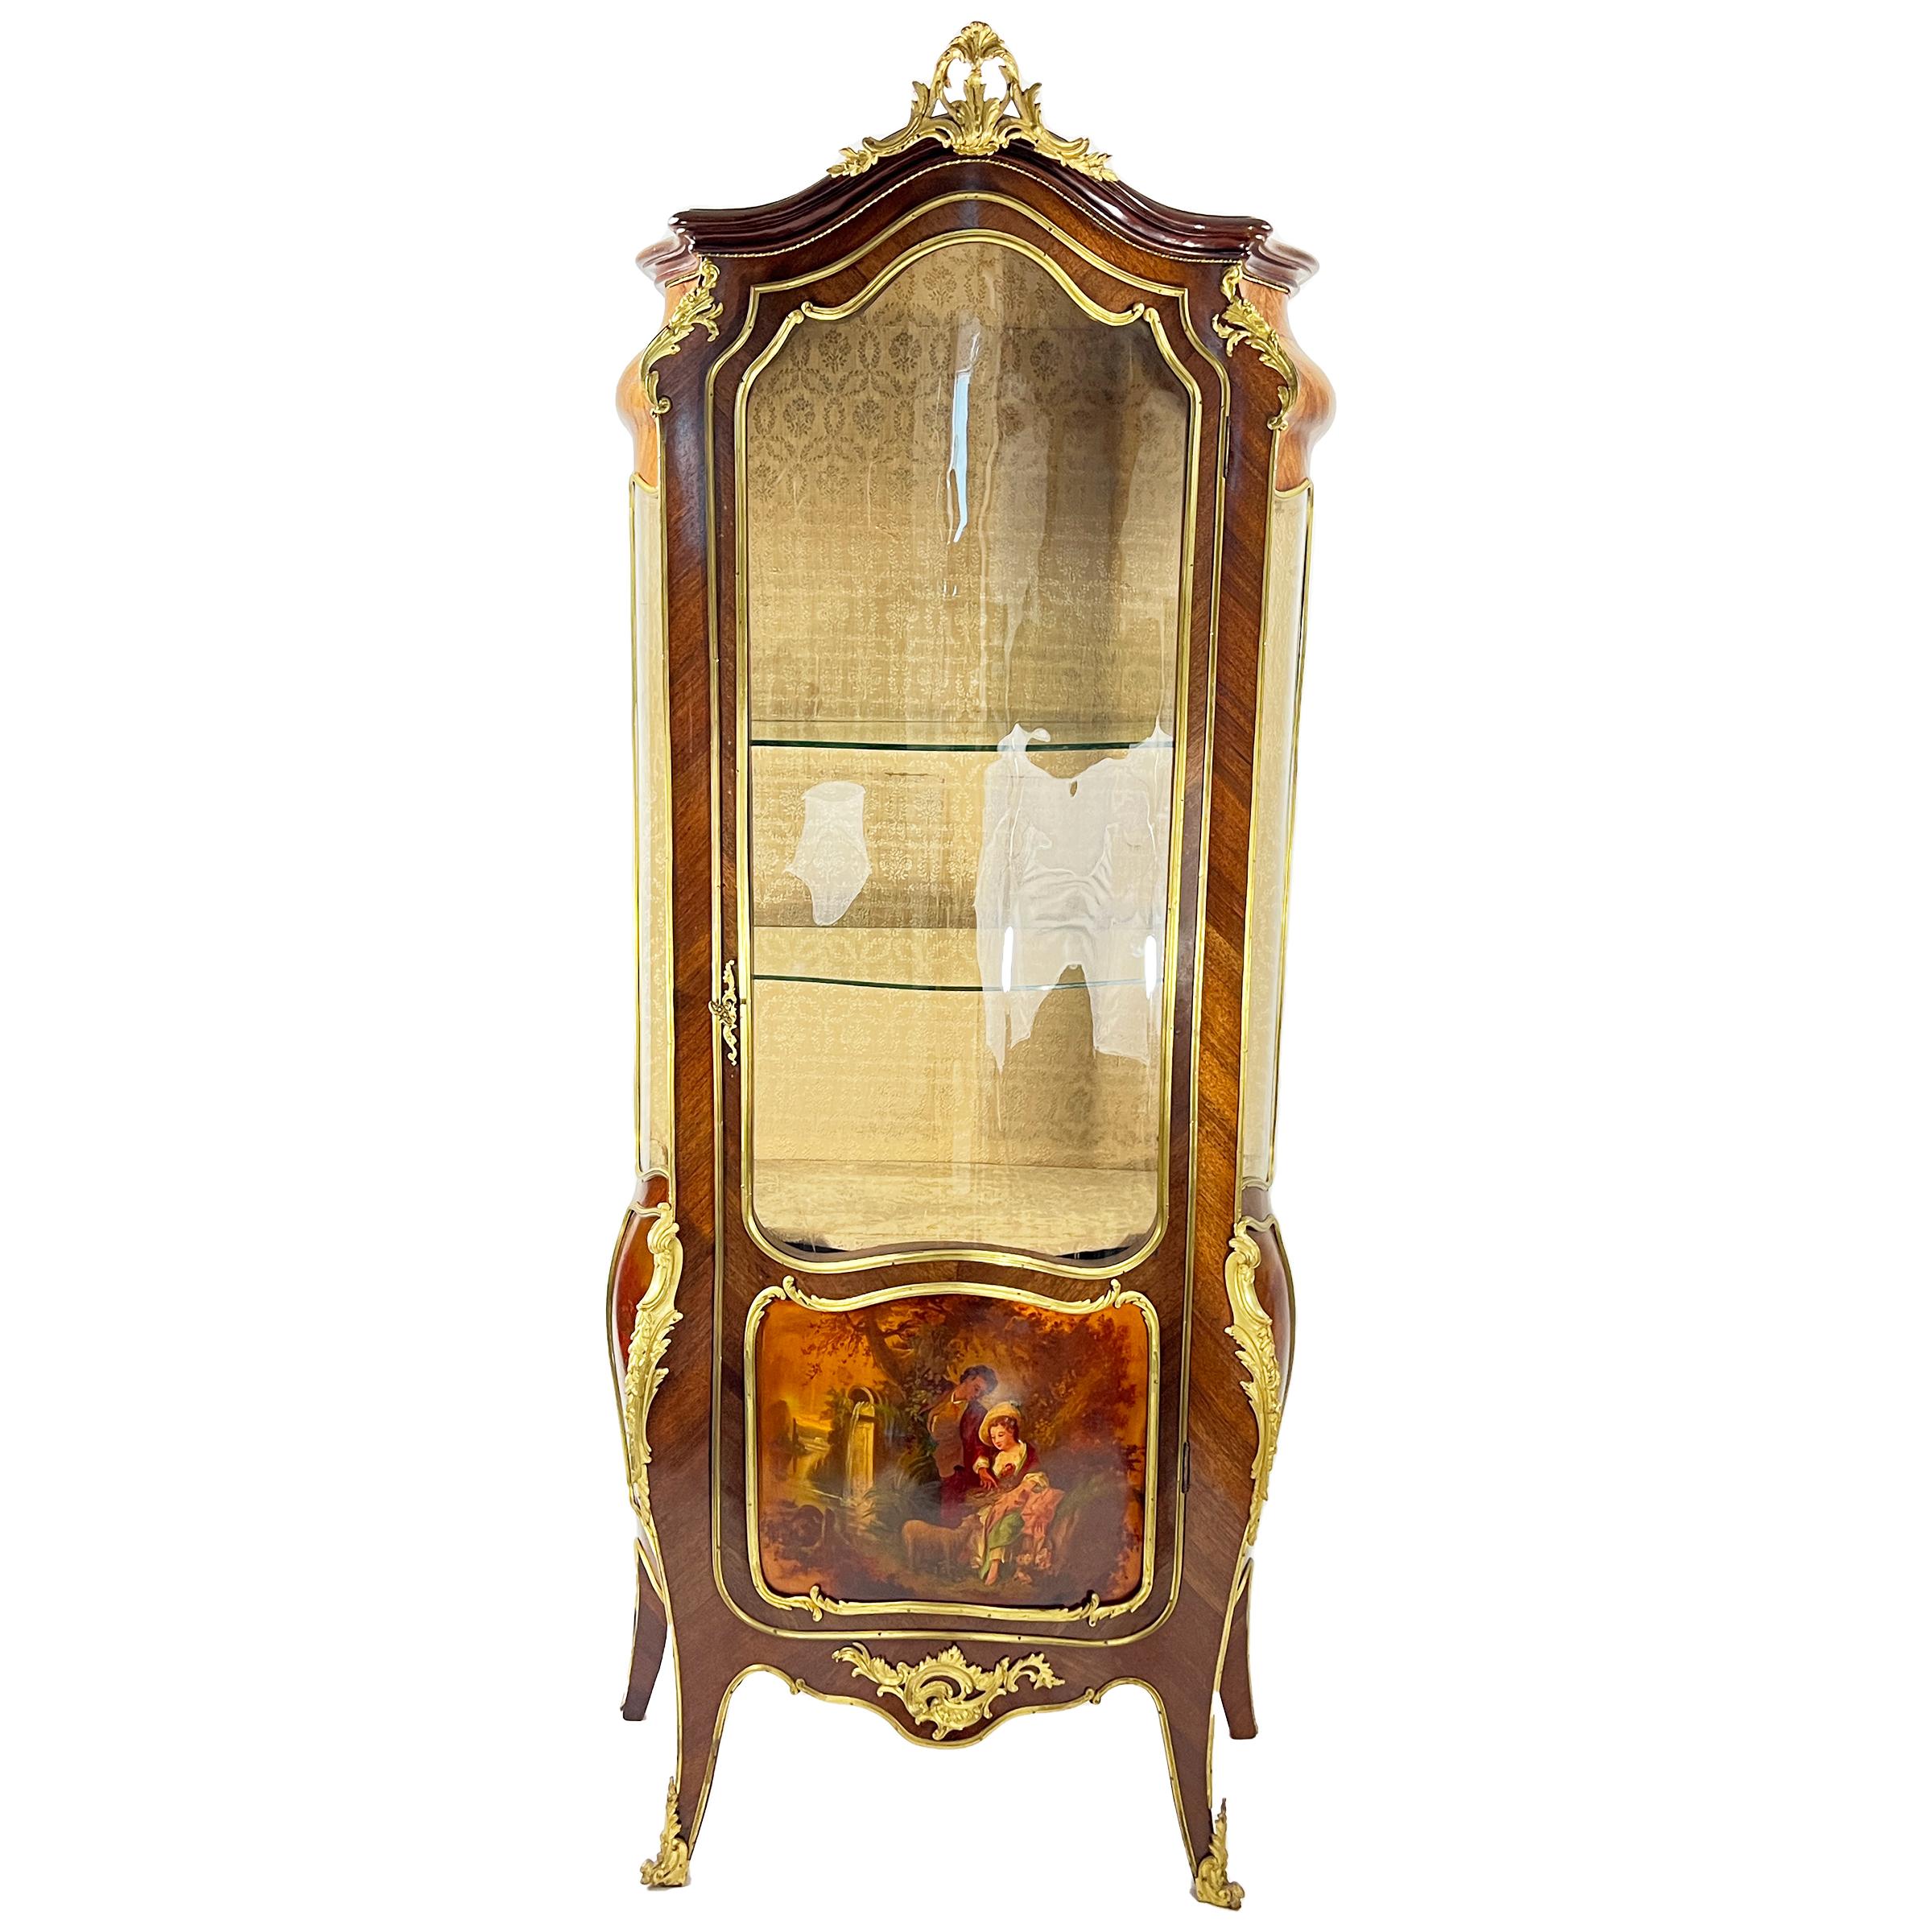 A fine late 19th century French vitrine cabinet, single glazed door, two glass shelves and lower storage. The front panel painted with lovers and landscape scenes on the sides.